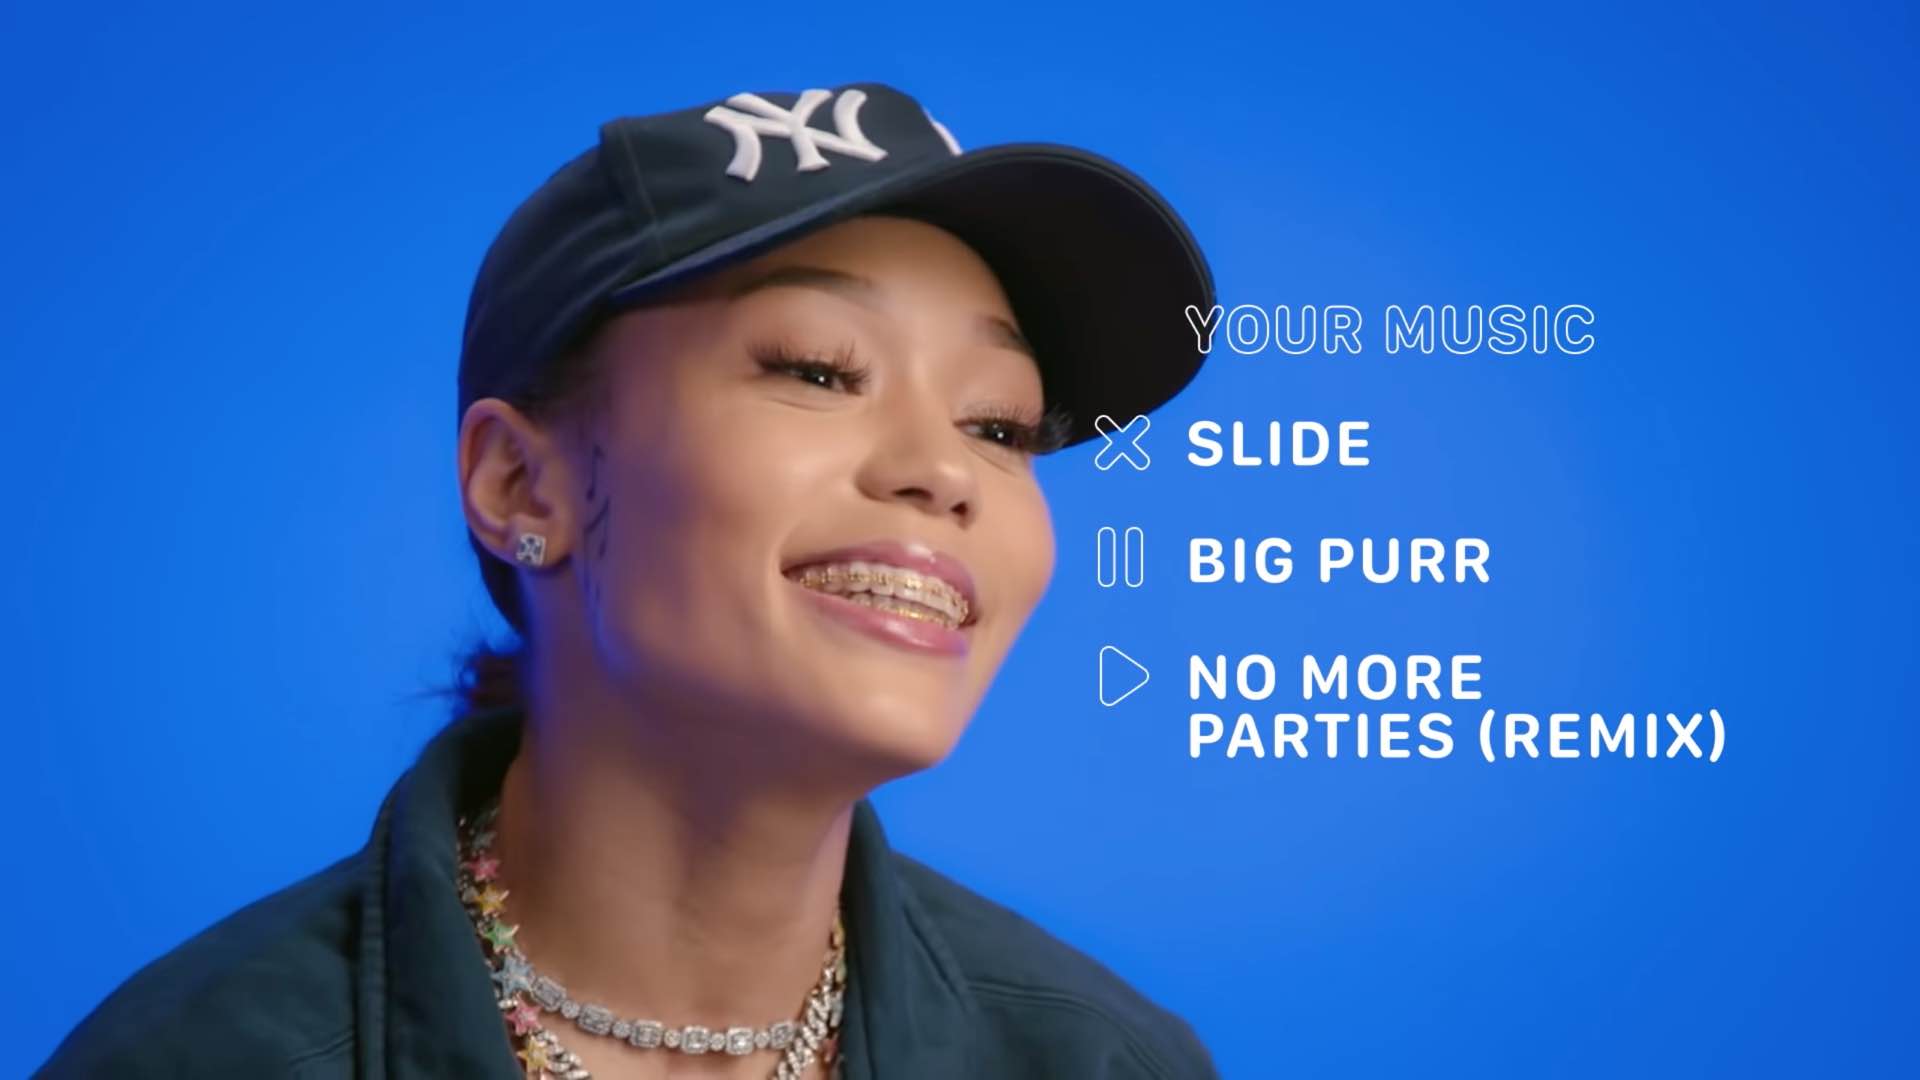 A still from Apple's game show "Play, Pause, Delete" featuring rapper Coi Leray